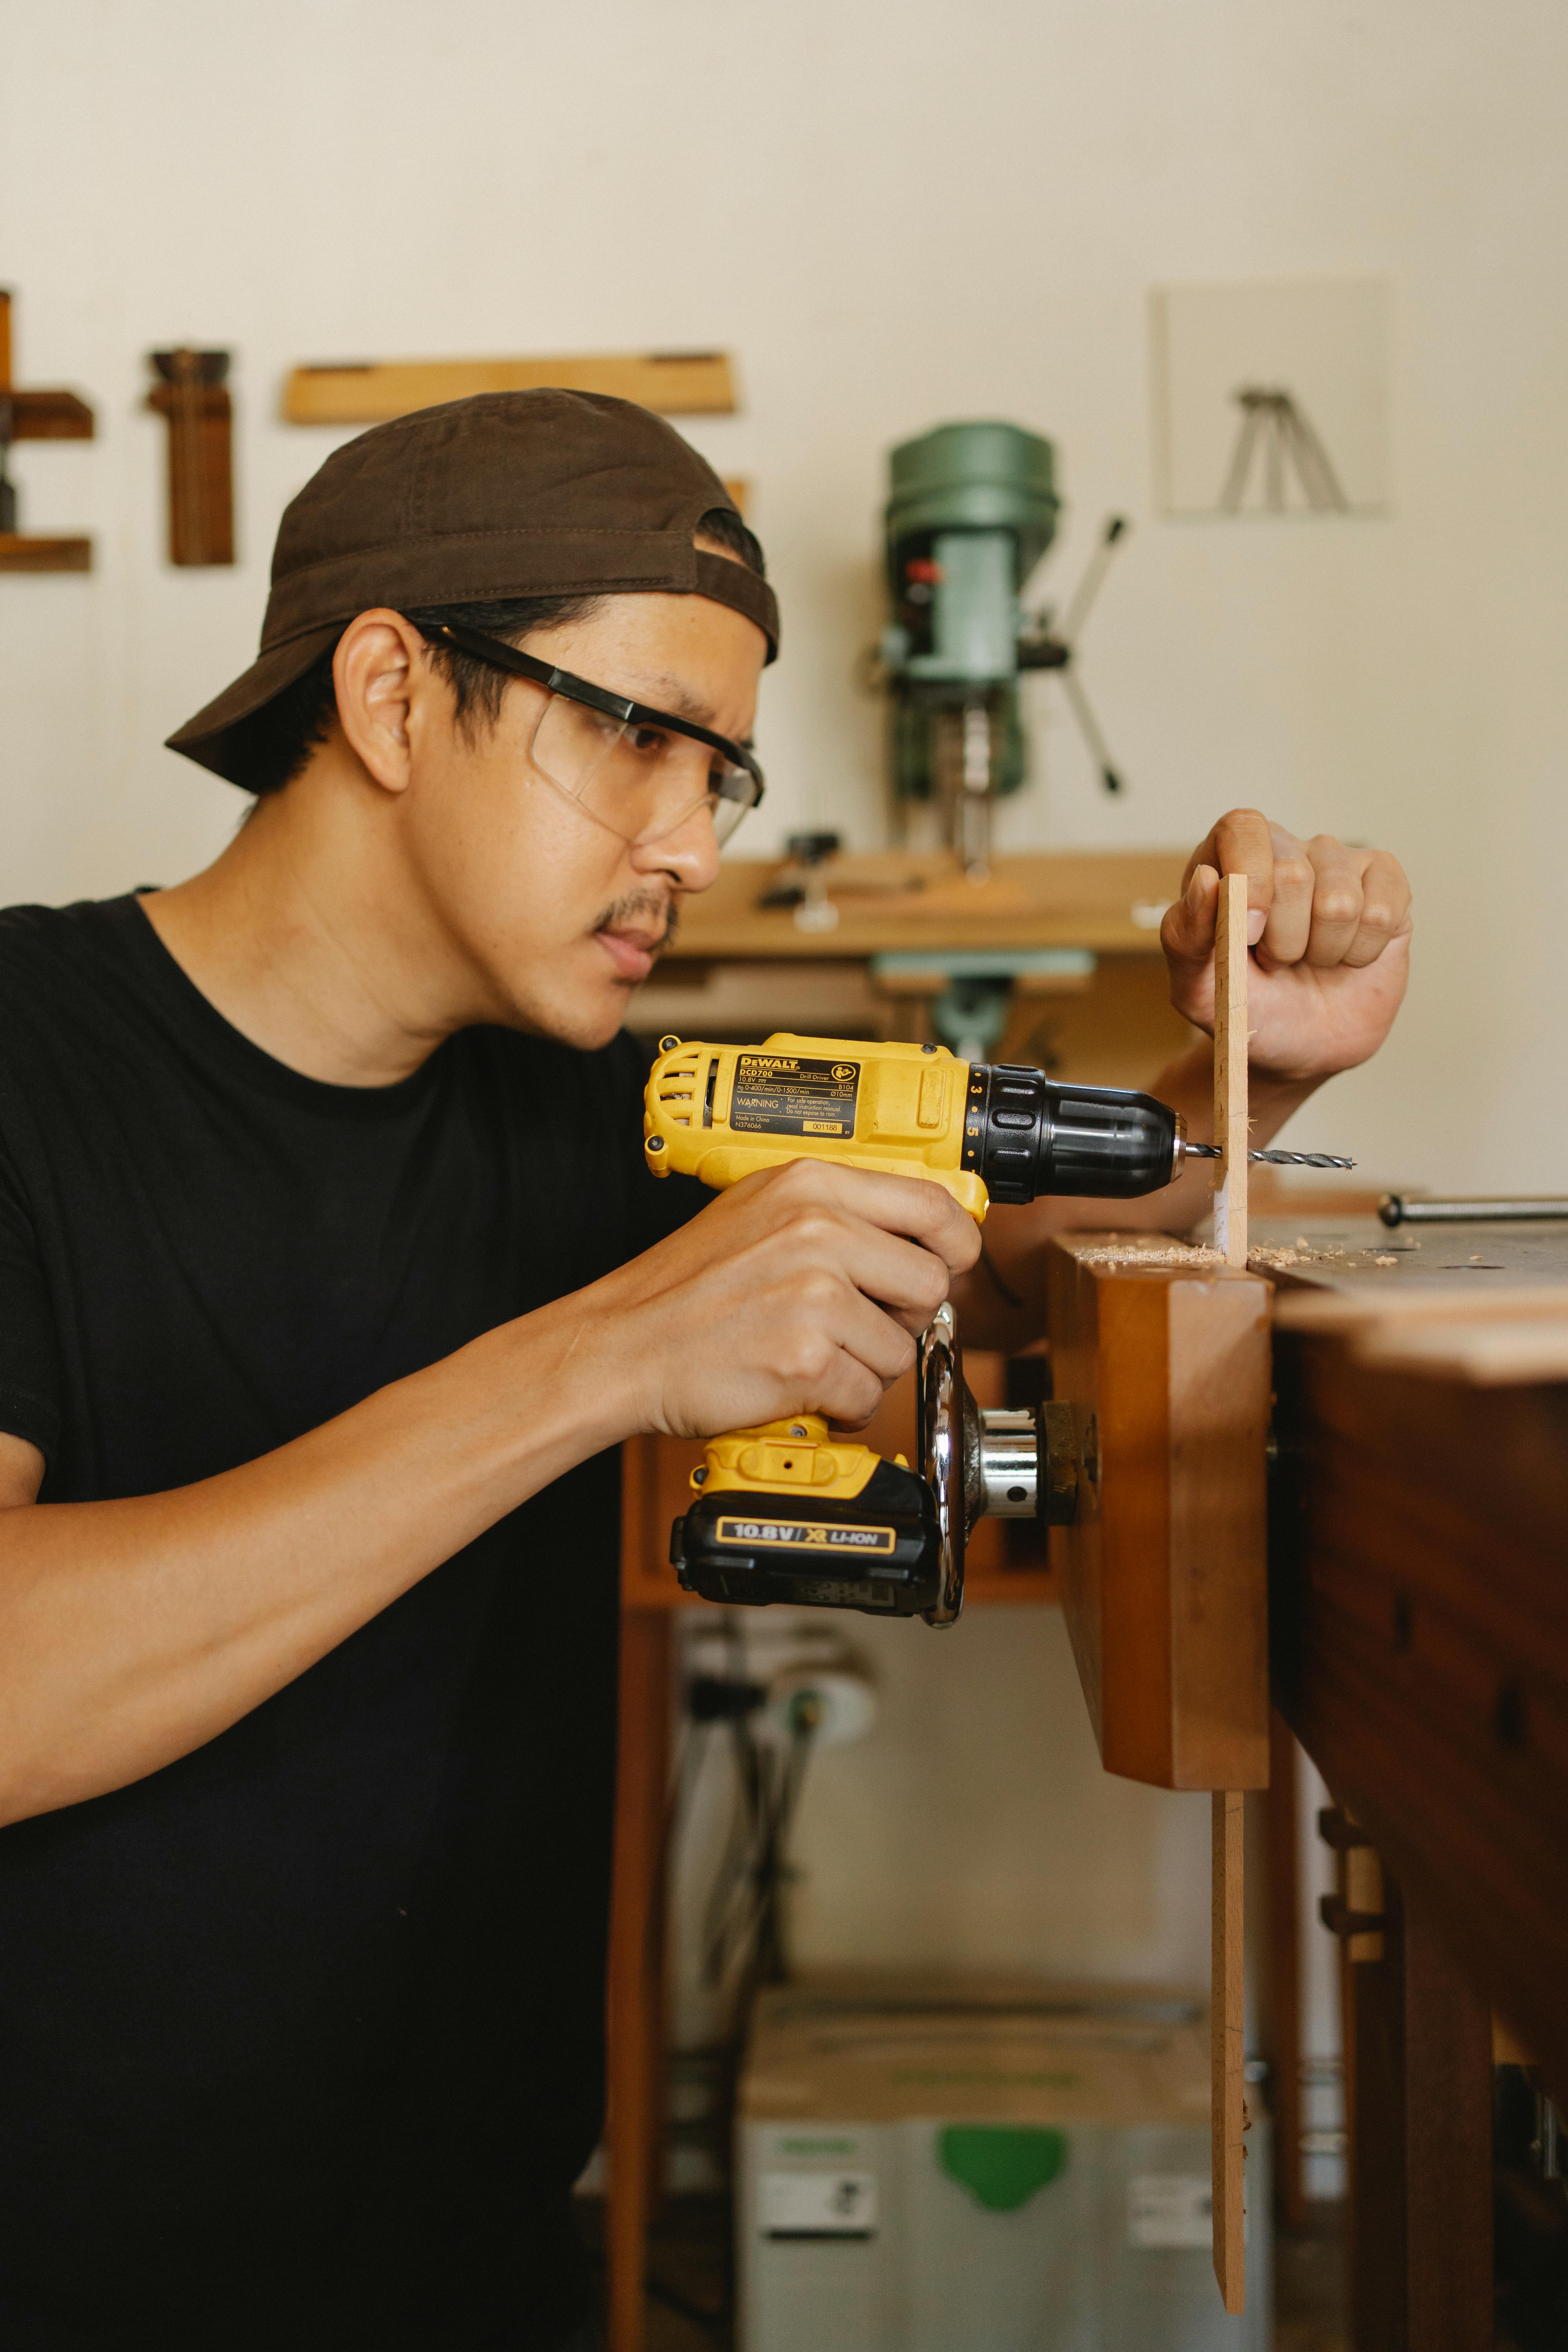 A man drilling a wooden plank | Source: Pexels